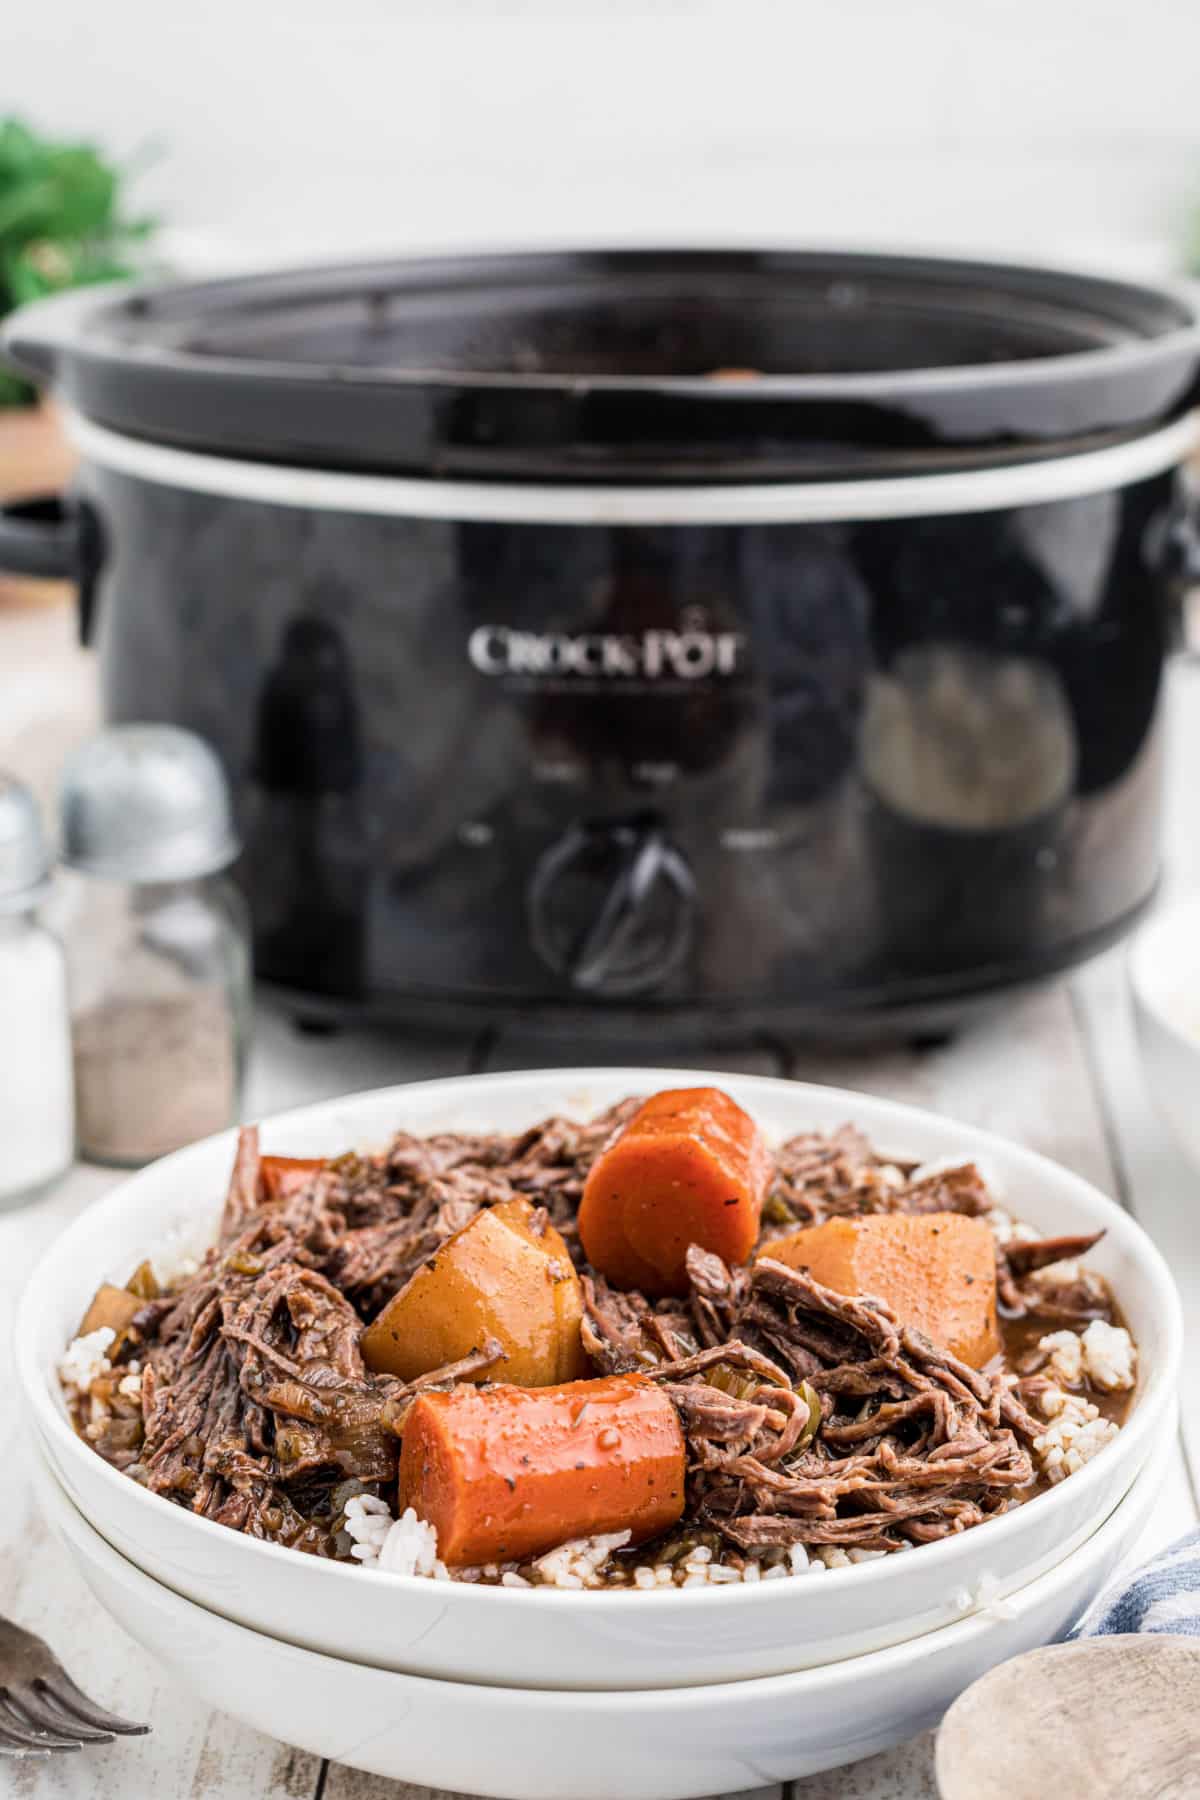 Slow Cooker Venison Roast with Red Wine